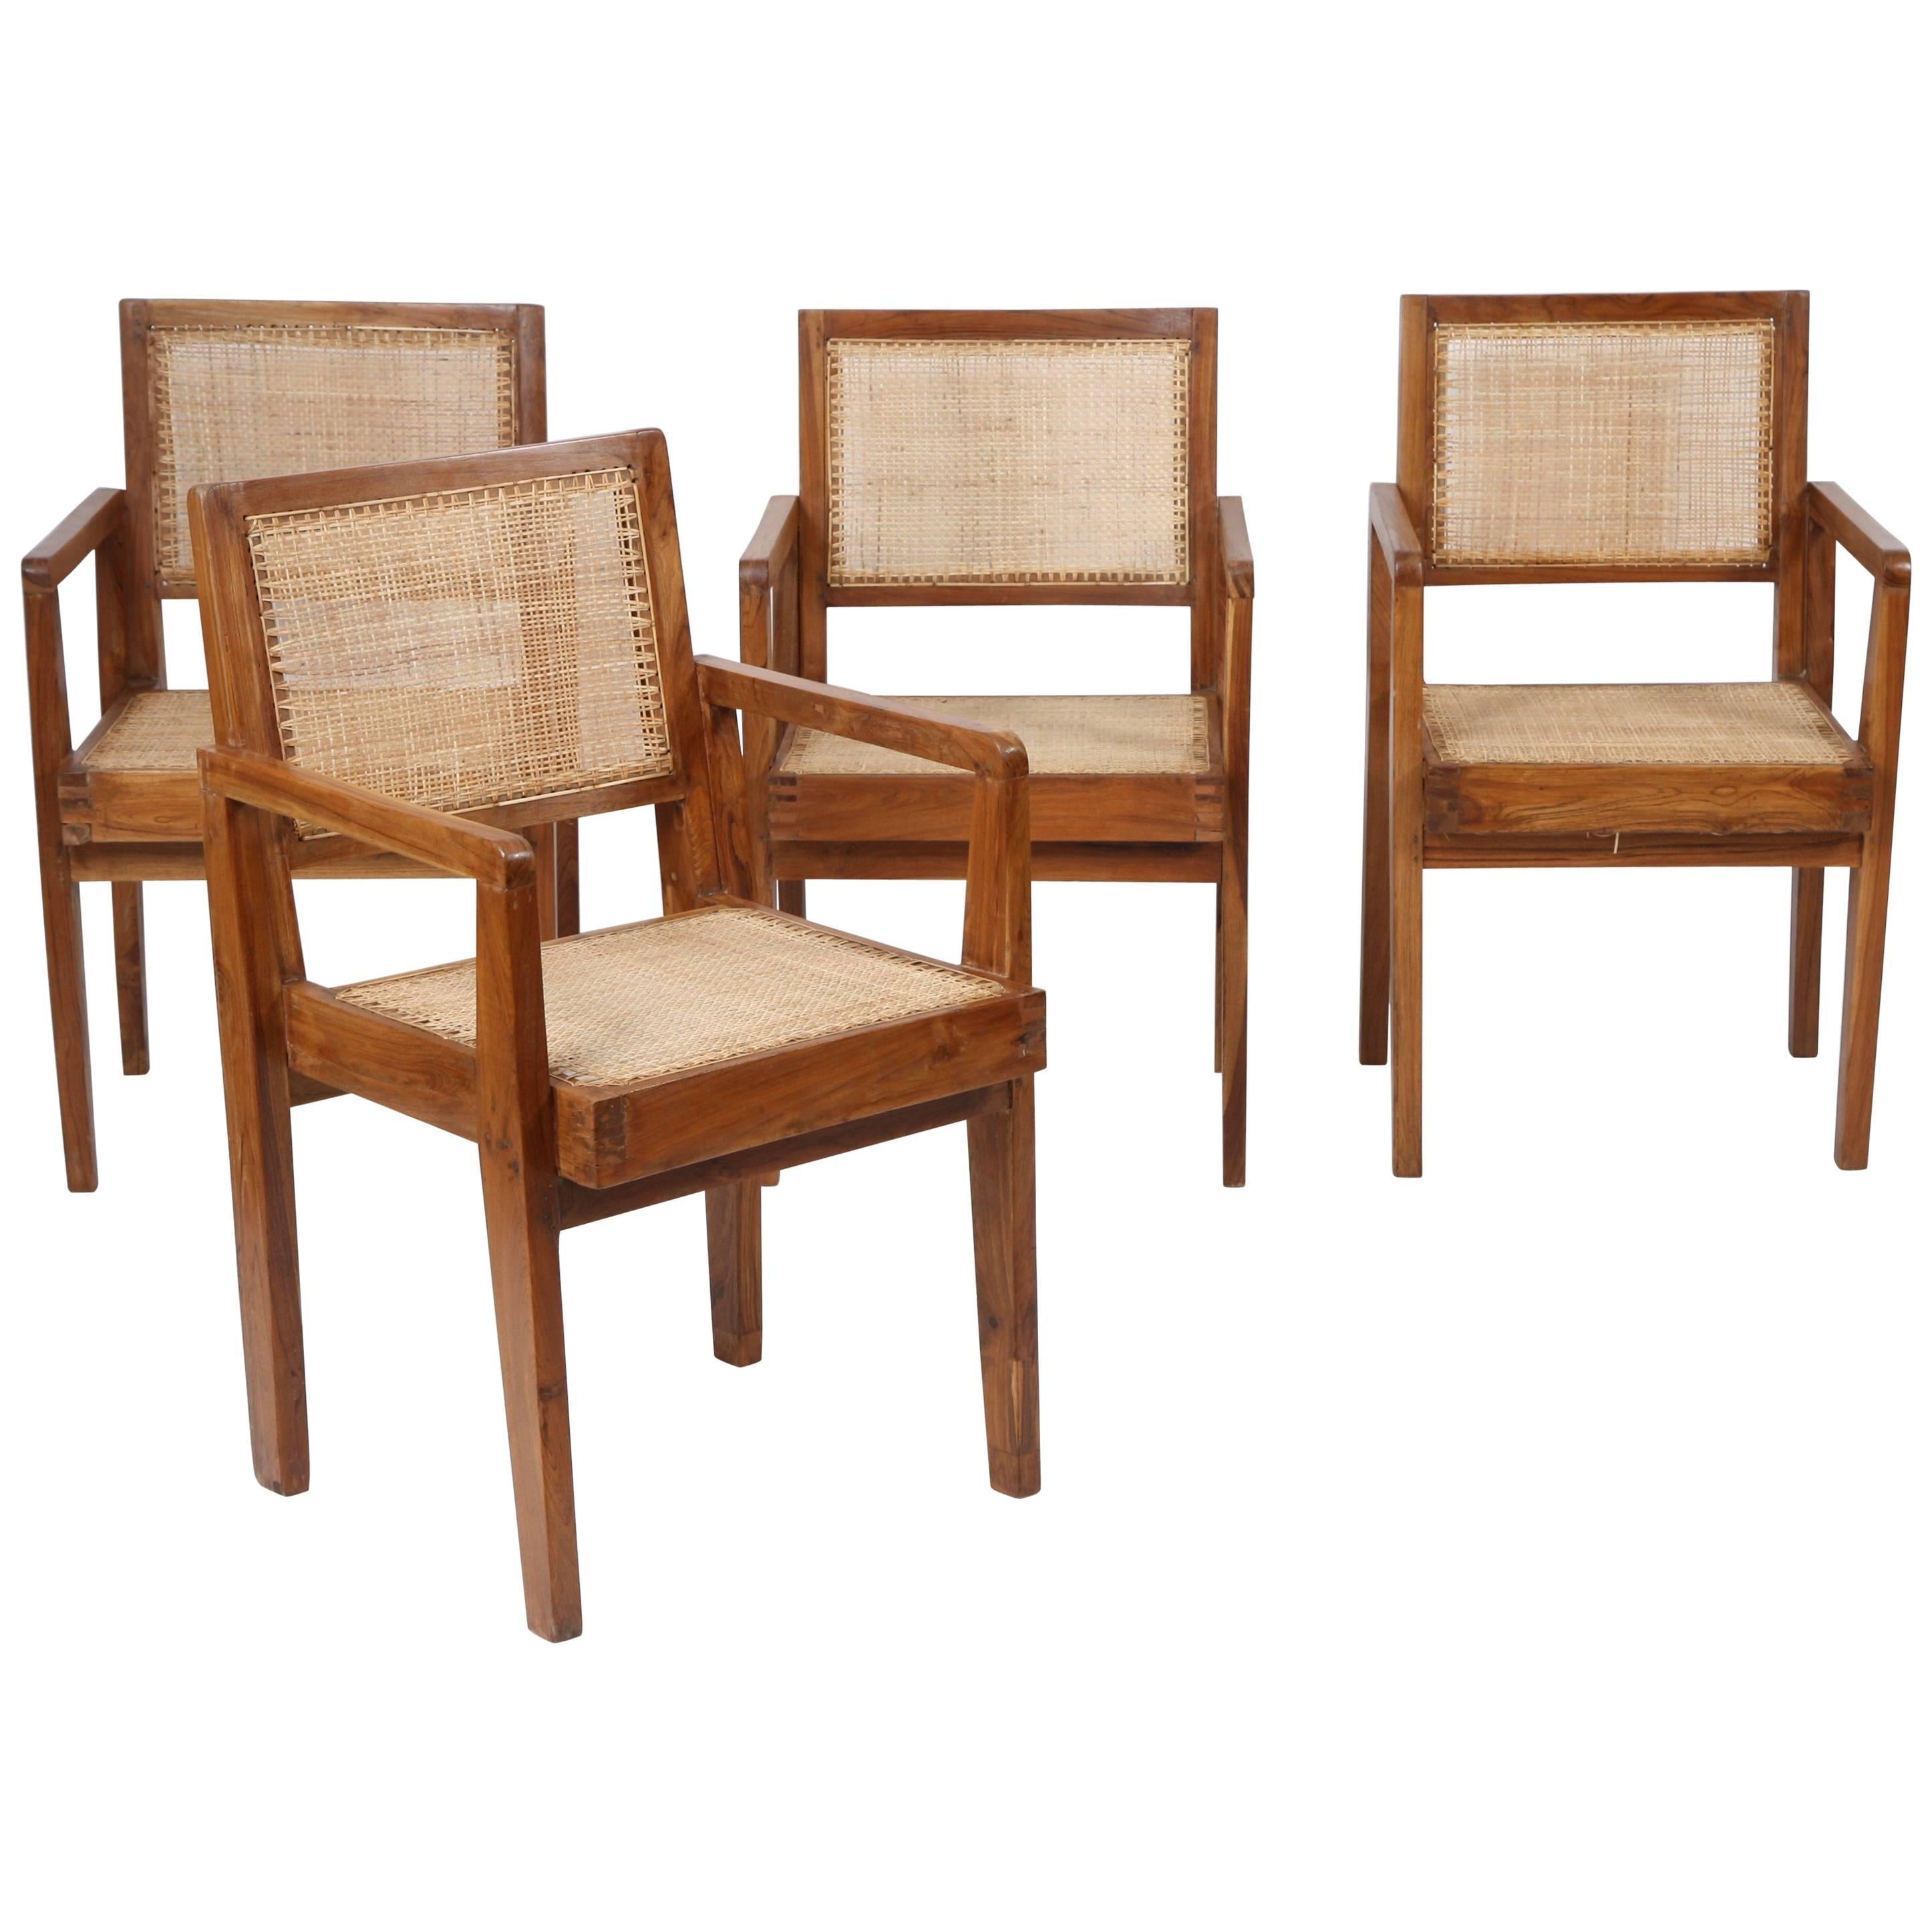 Pierre Jeanneret Set of Four Chairs "Take Down Armchair"